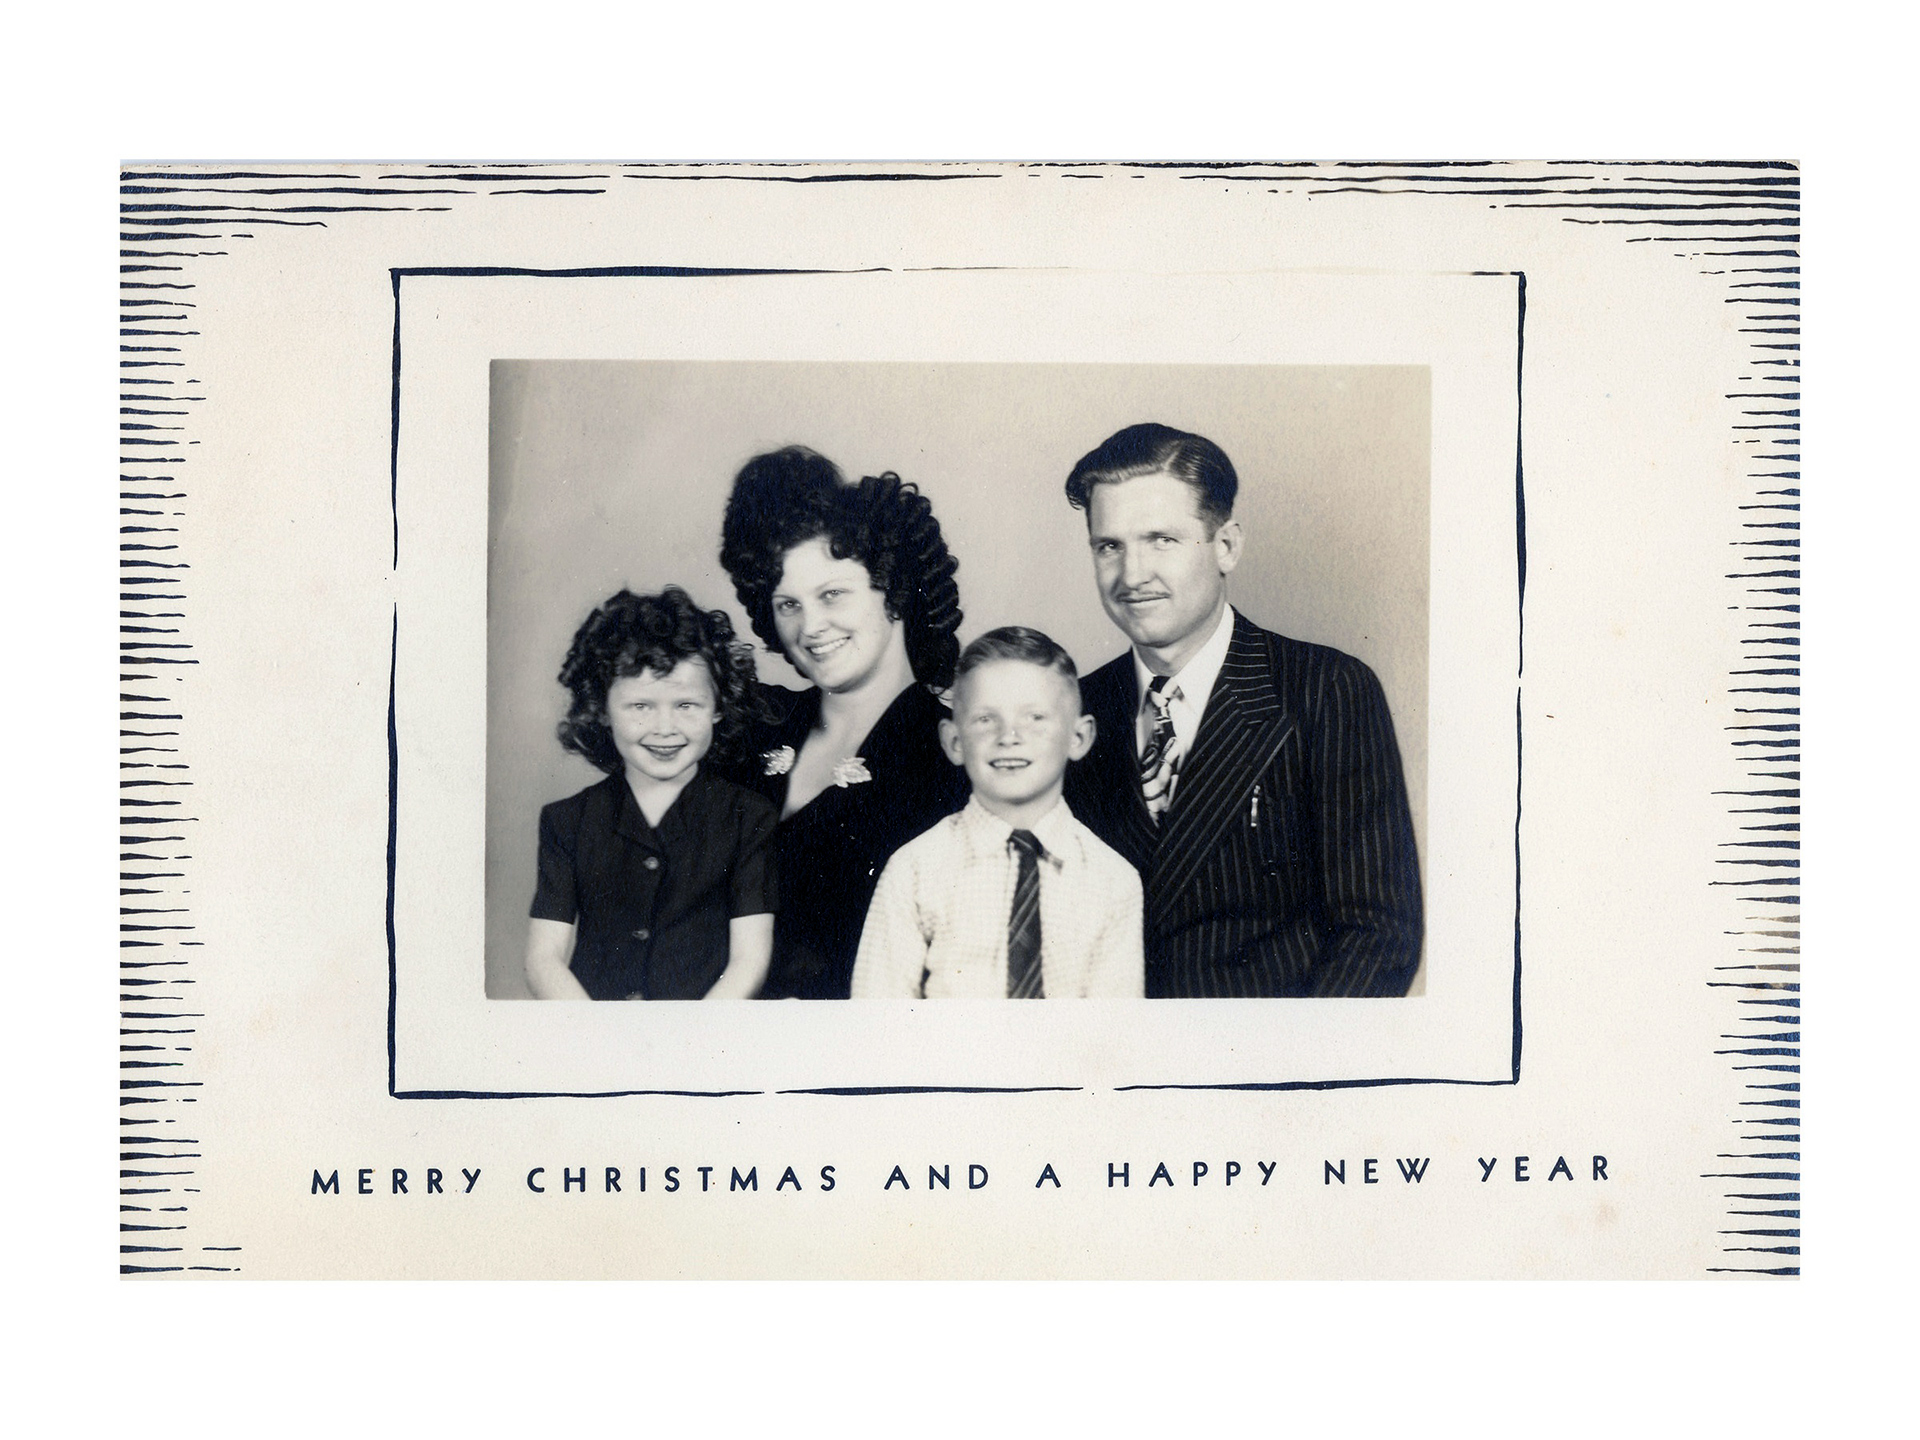 The Jones Family's Christmas card, promoting their Columbus, Georgia, radio show, "The Joneses Sing," from 1945. From left, the author, her mother, Fern, her brother, Leslie Ray, and her father, Raymond.